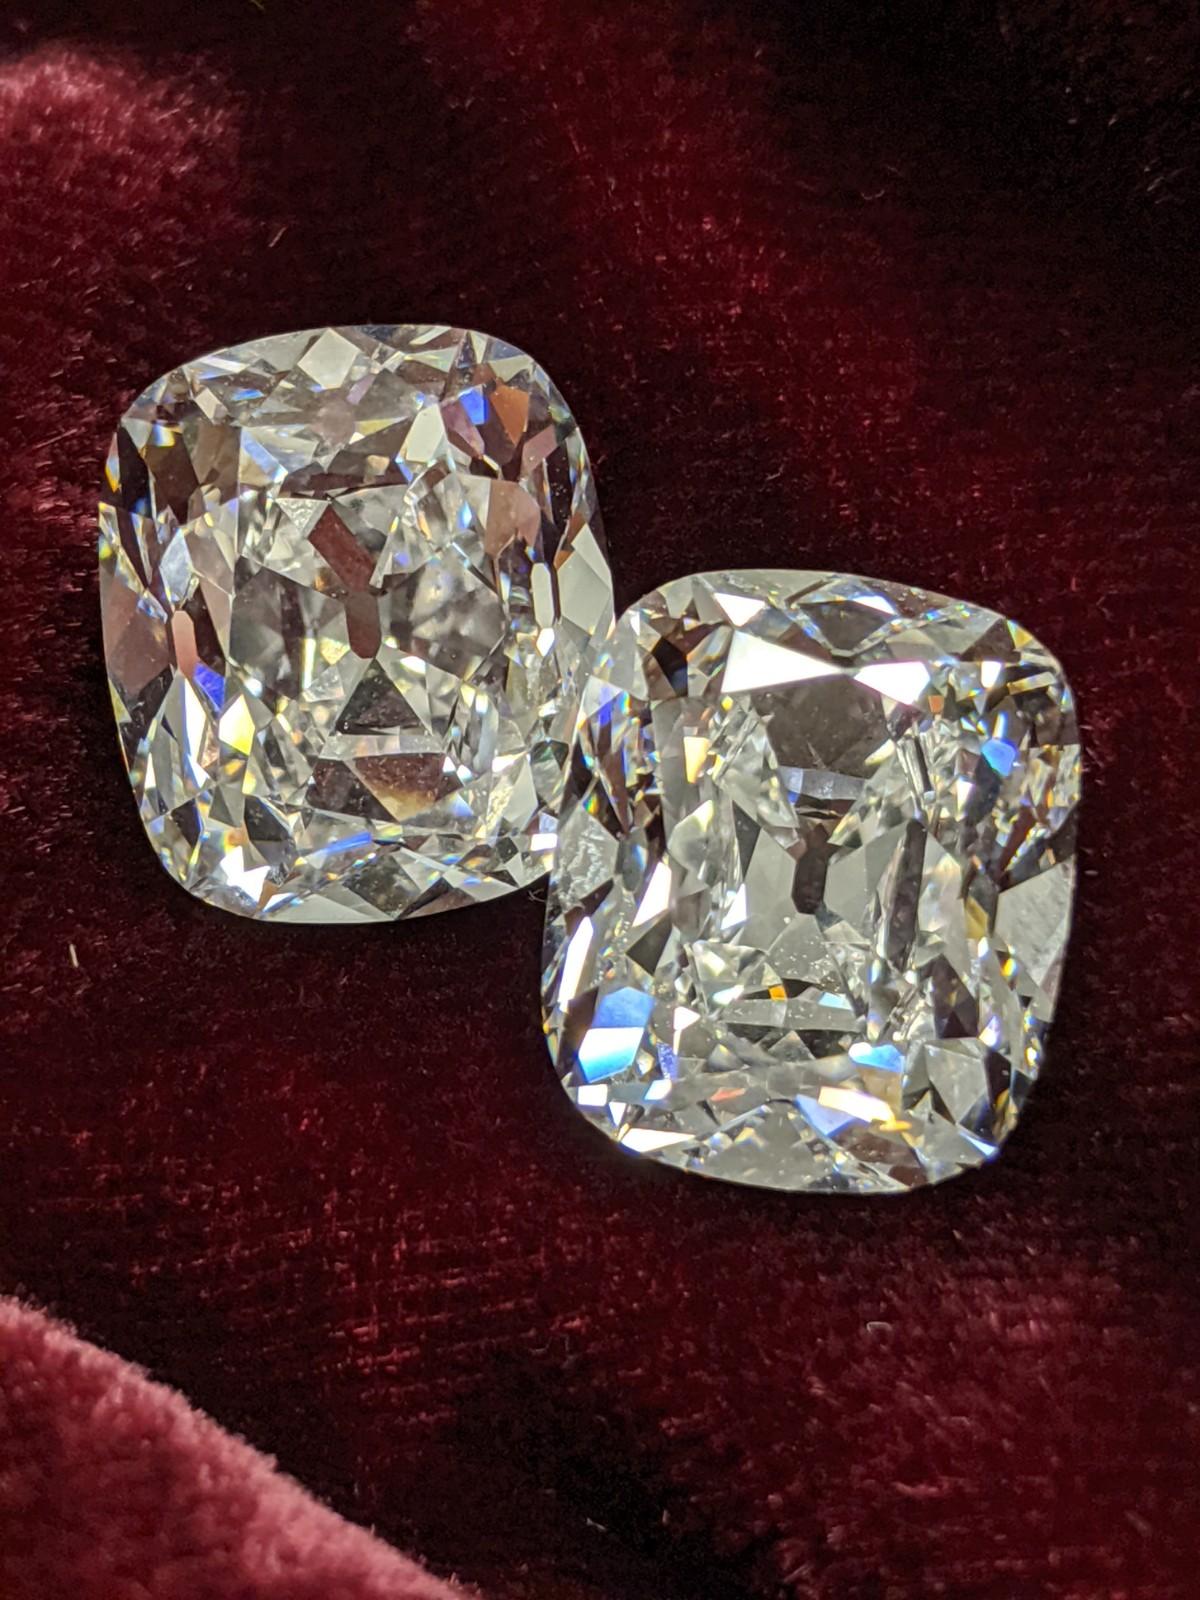 Limited time listing for this pair of spectacular Antique Cut Cushion shape diamonds. This shape is red hot right now on the international collecting scene.  Featuring a matched pair of eight carat each D and E color VS1 and VS2 clarity collector